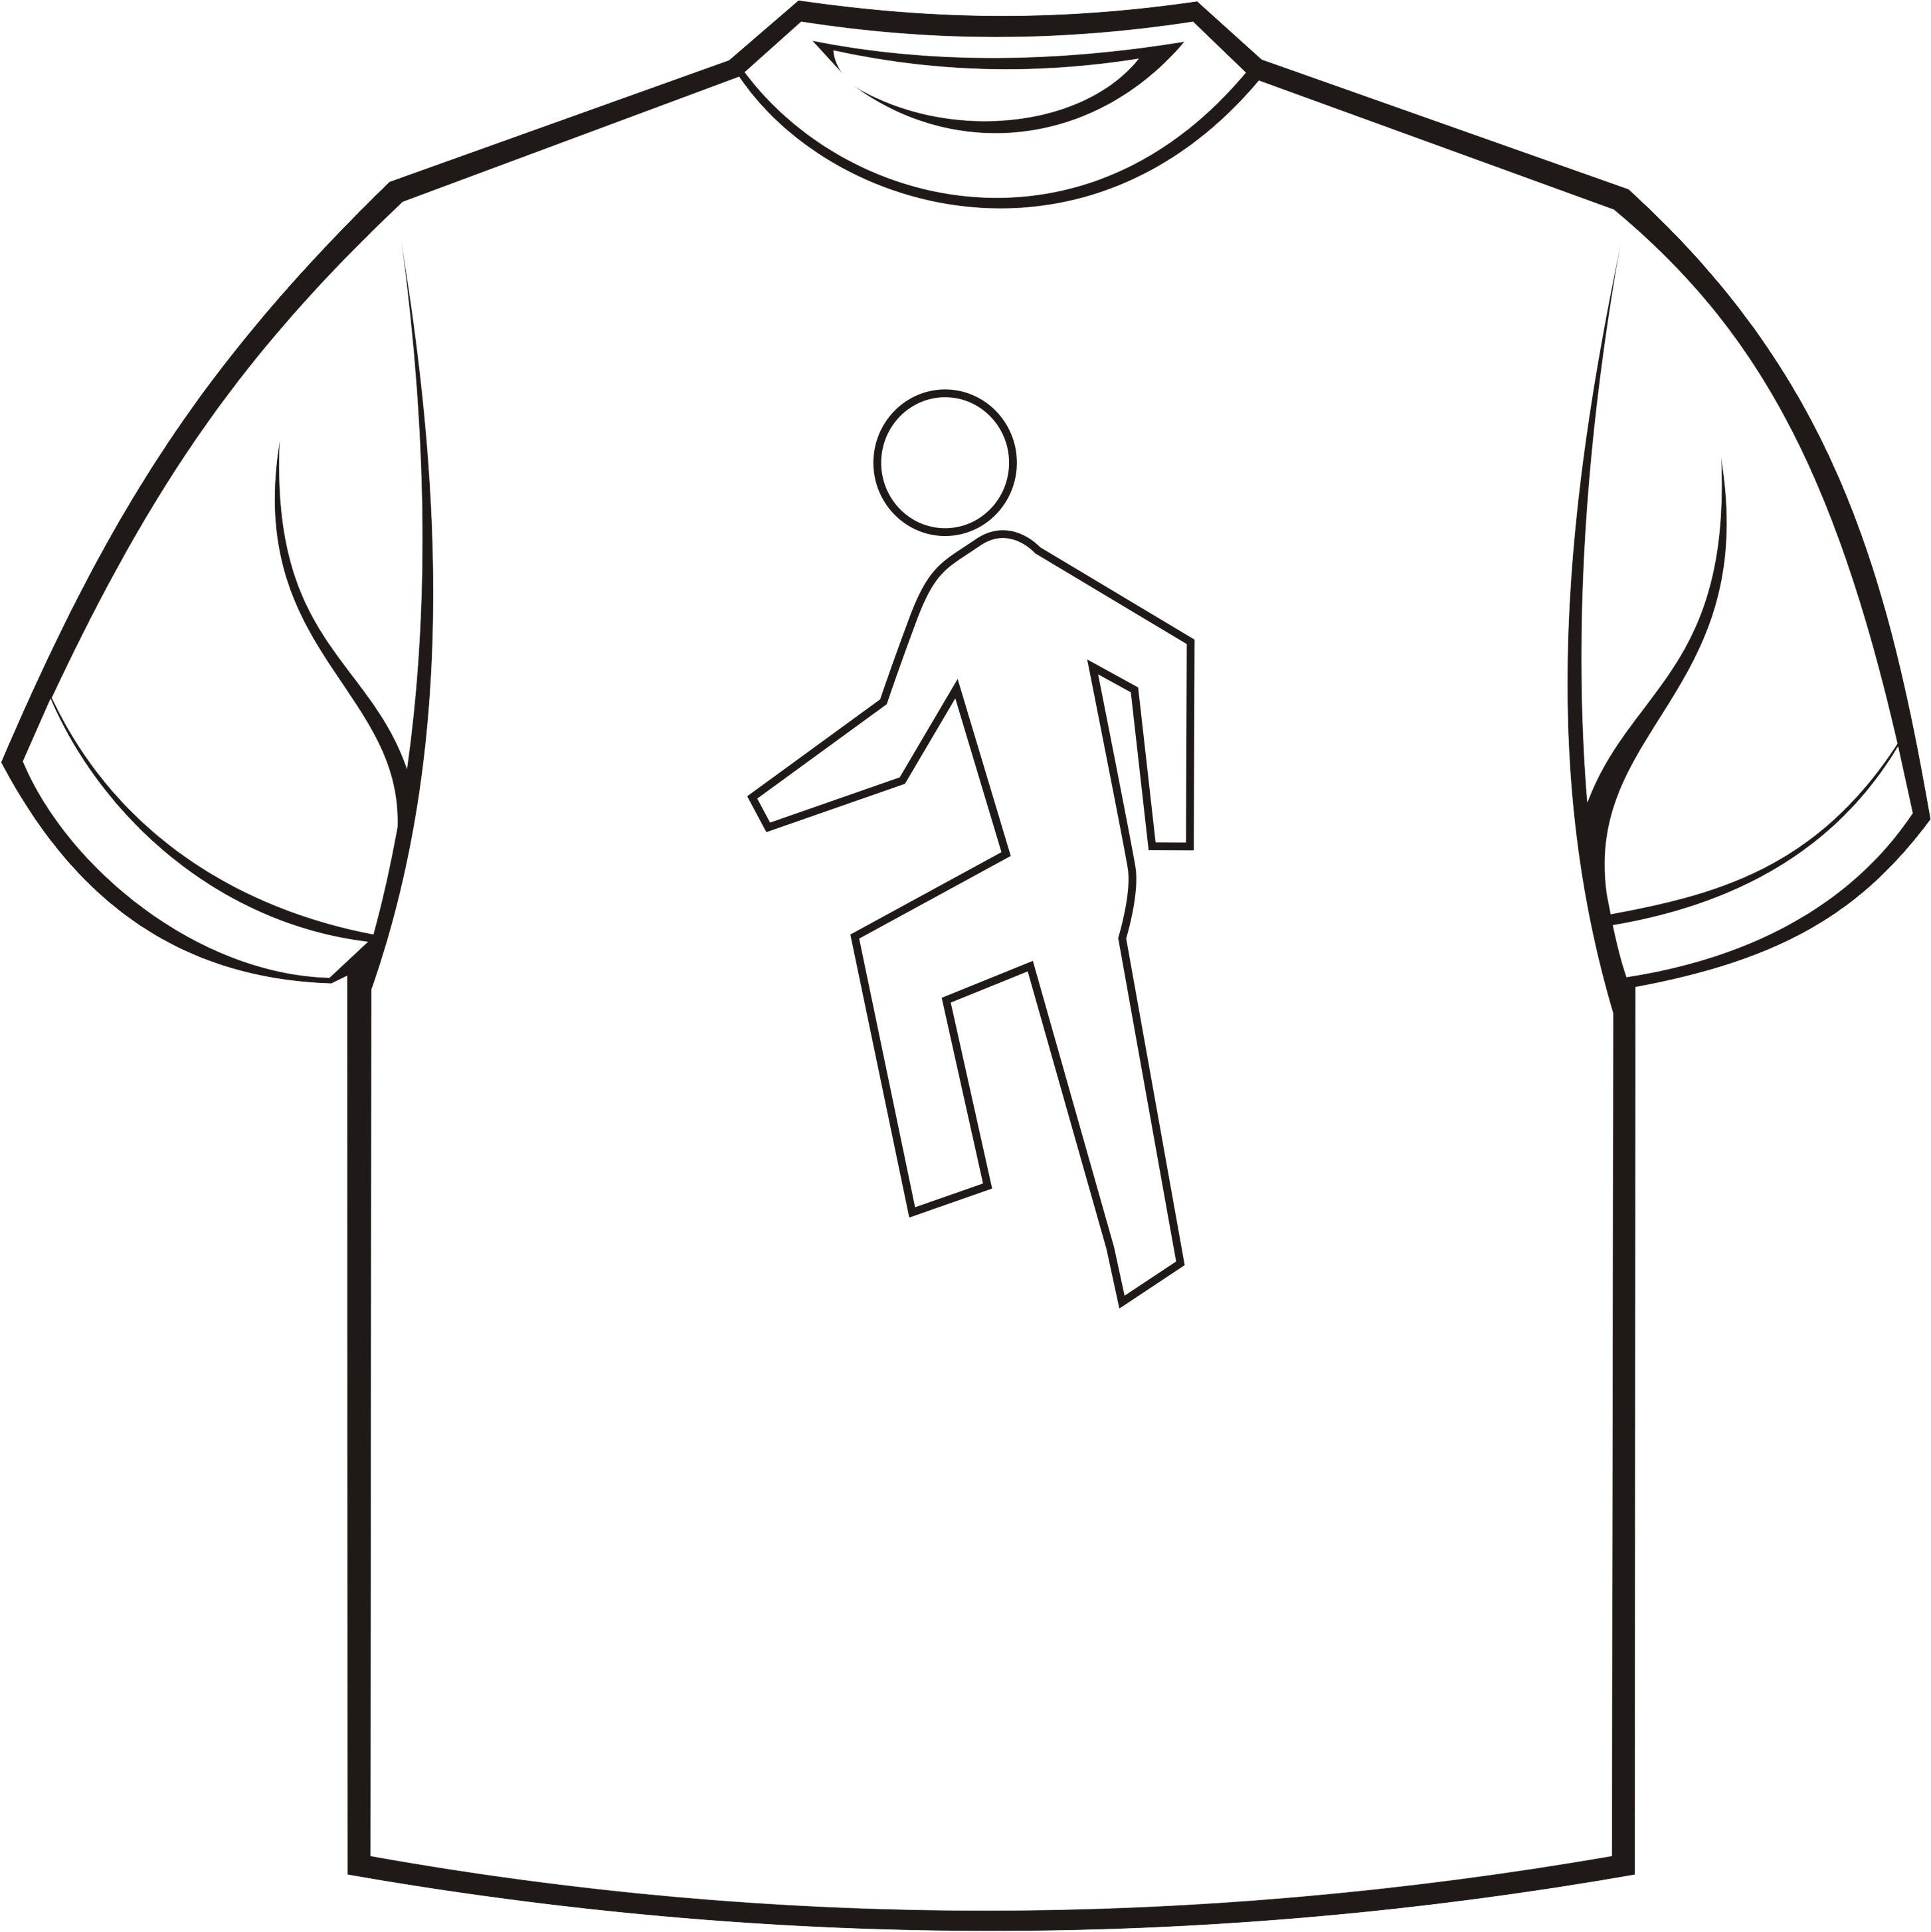 Printable T Shirt Outline - Clipart library